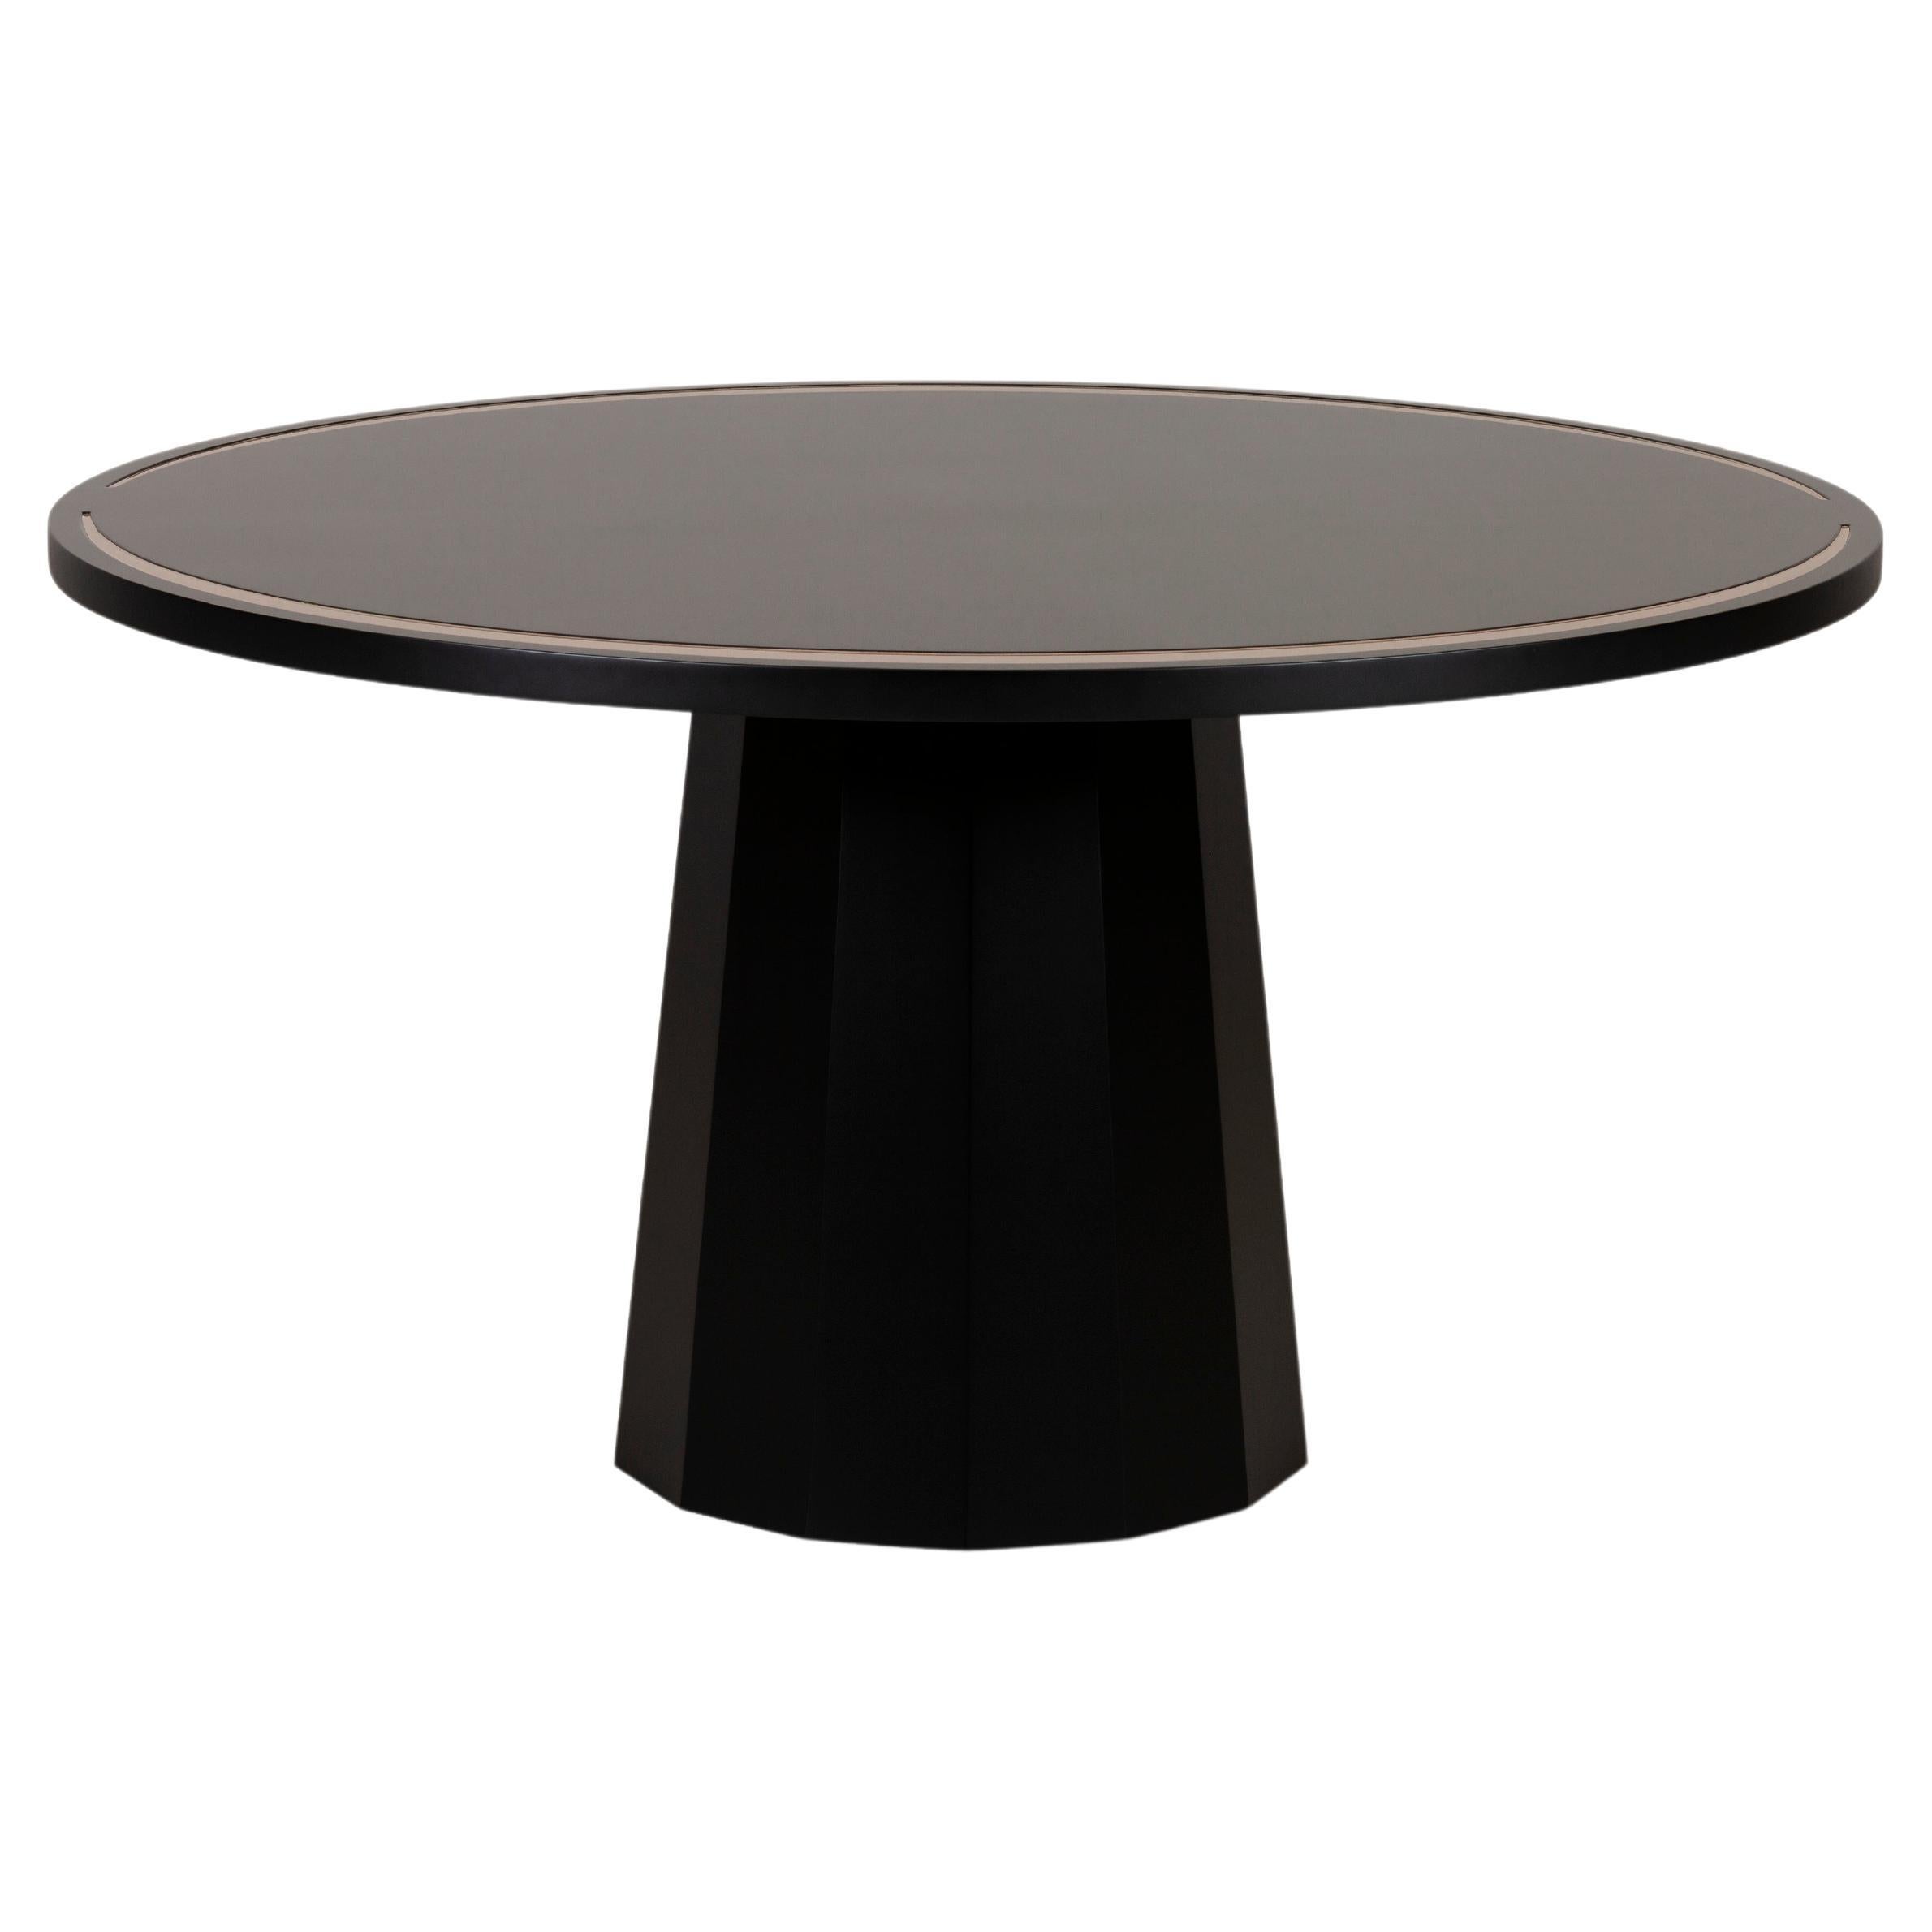 Modern Howlite Round Dining Table Black Handmade in Portugal by Greenapple